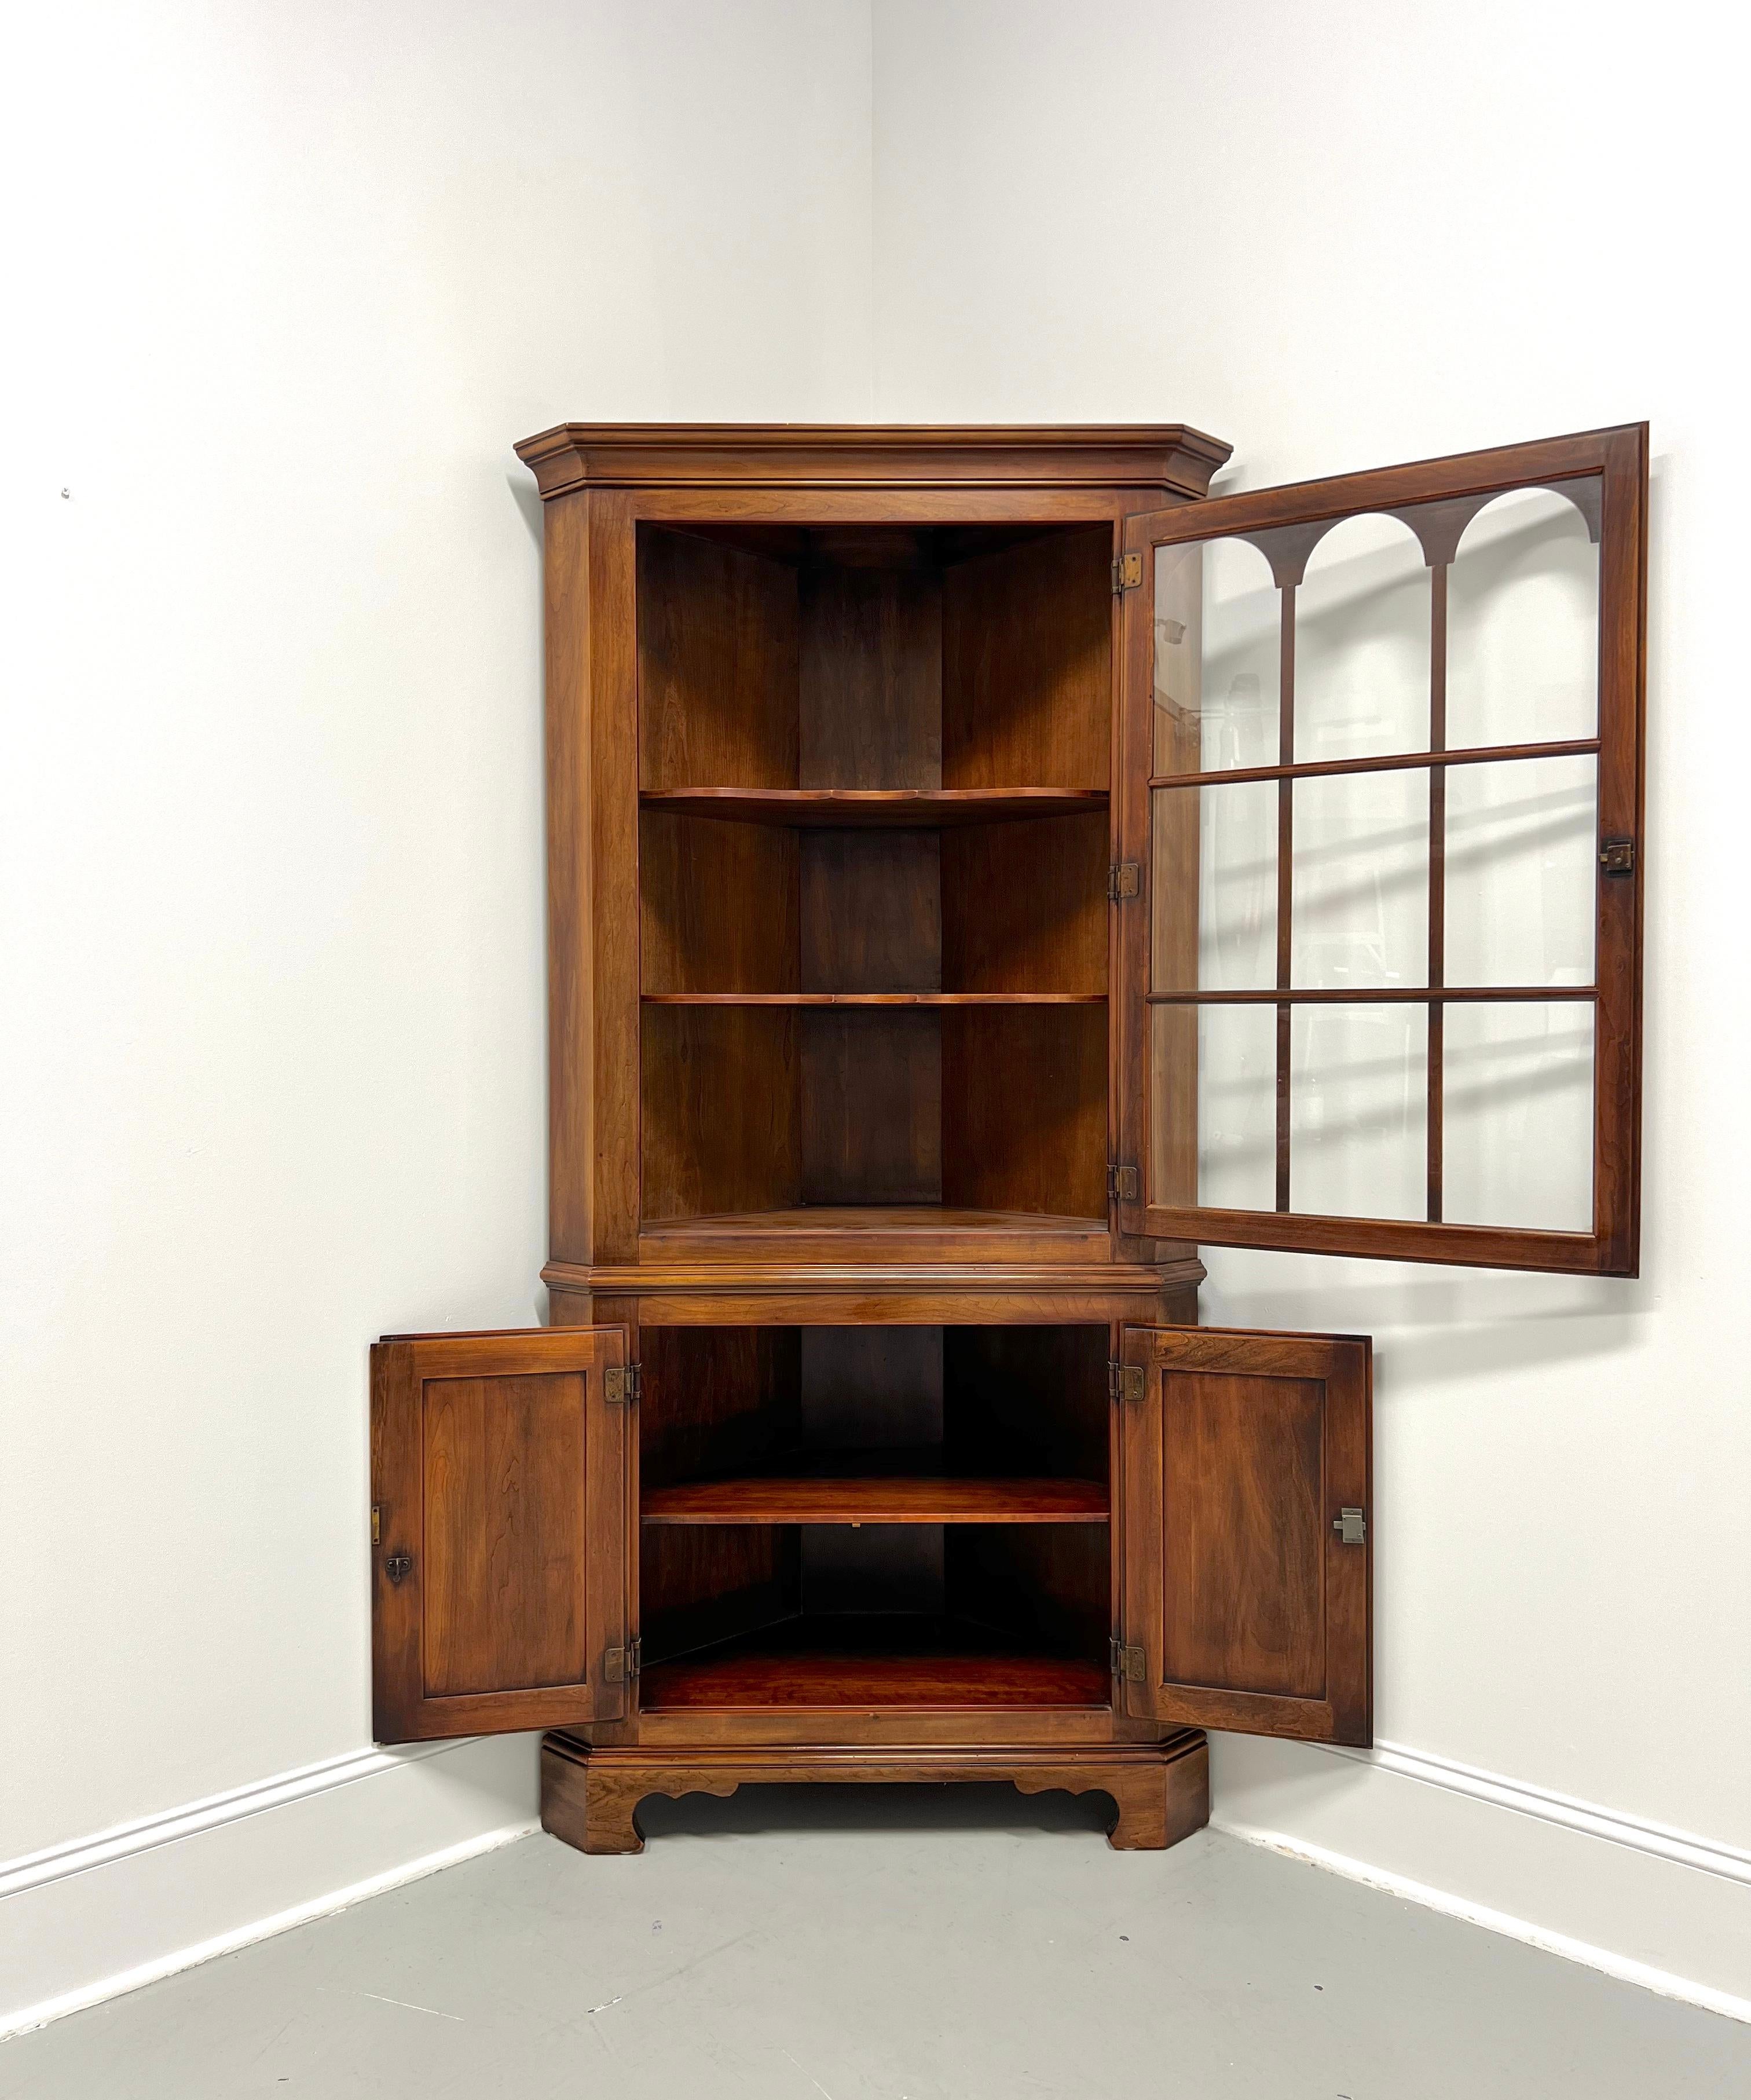 A Chippendale style corner cupboard by Statton Furniture. Solid cherry wood with their Oxford Antique finish, brass hardware, crown molding to top, an ogee edge dividing the sections, and carved bracket feet. Upper cabinet features two fixed